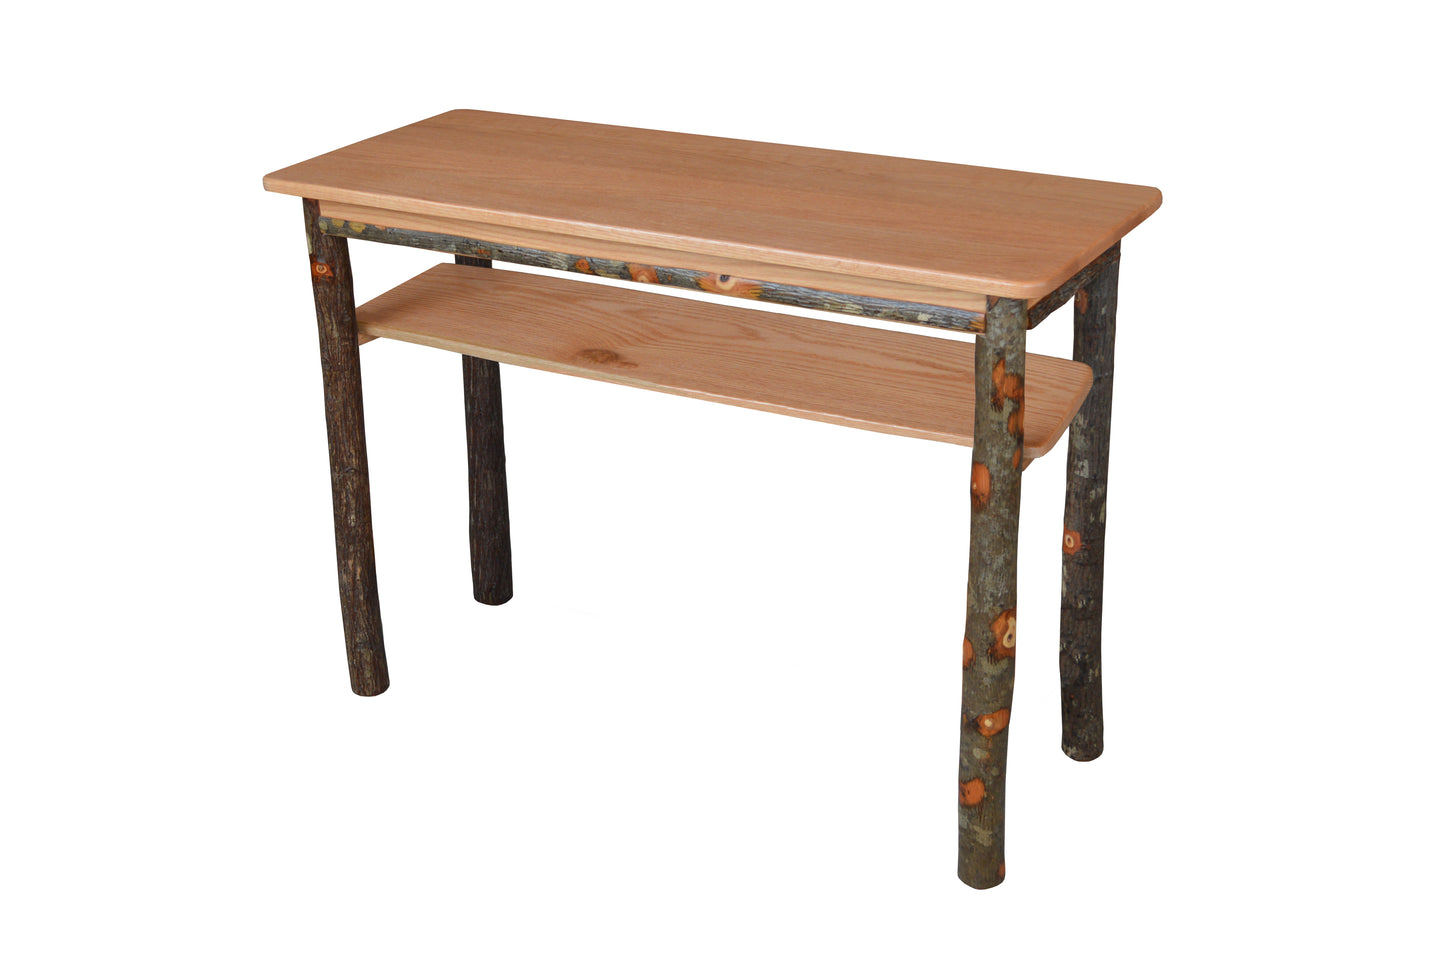 A&L Furniture Co. Hickory Hallway Table - LEAD TIME TO SHIP 10 BUSINESS DAYS